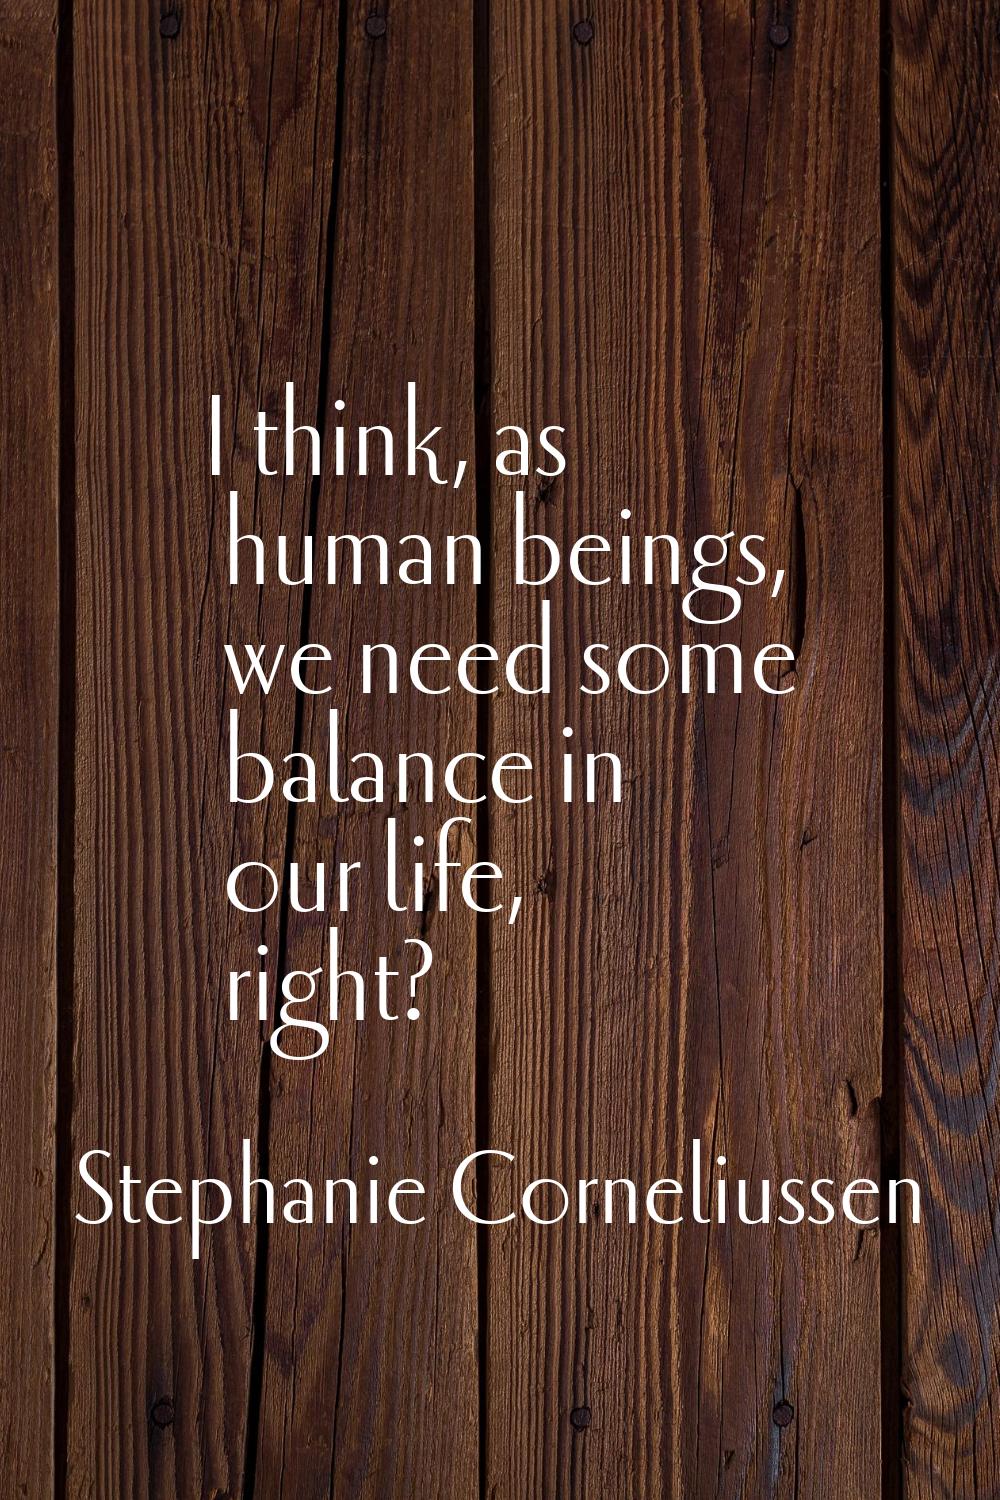 I think, as human beings, we need some balance in our life, right?